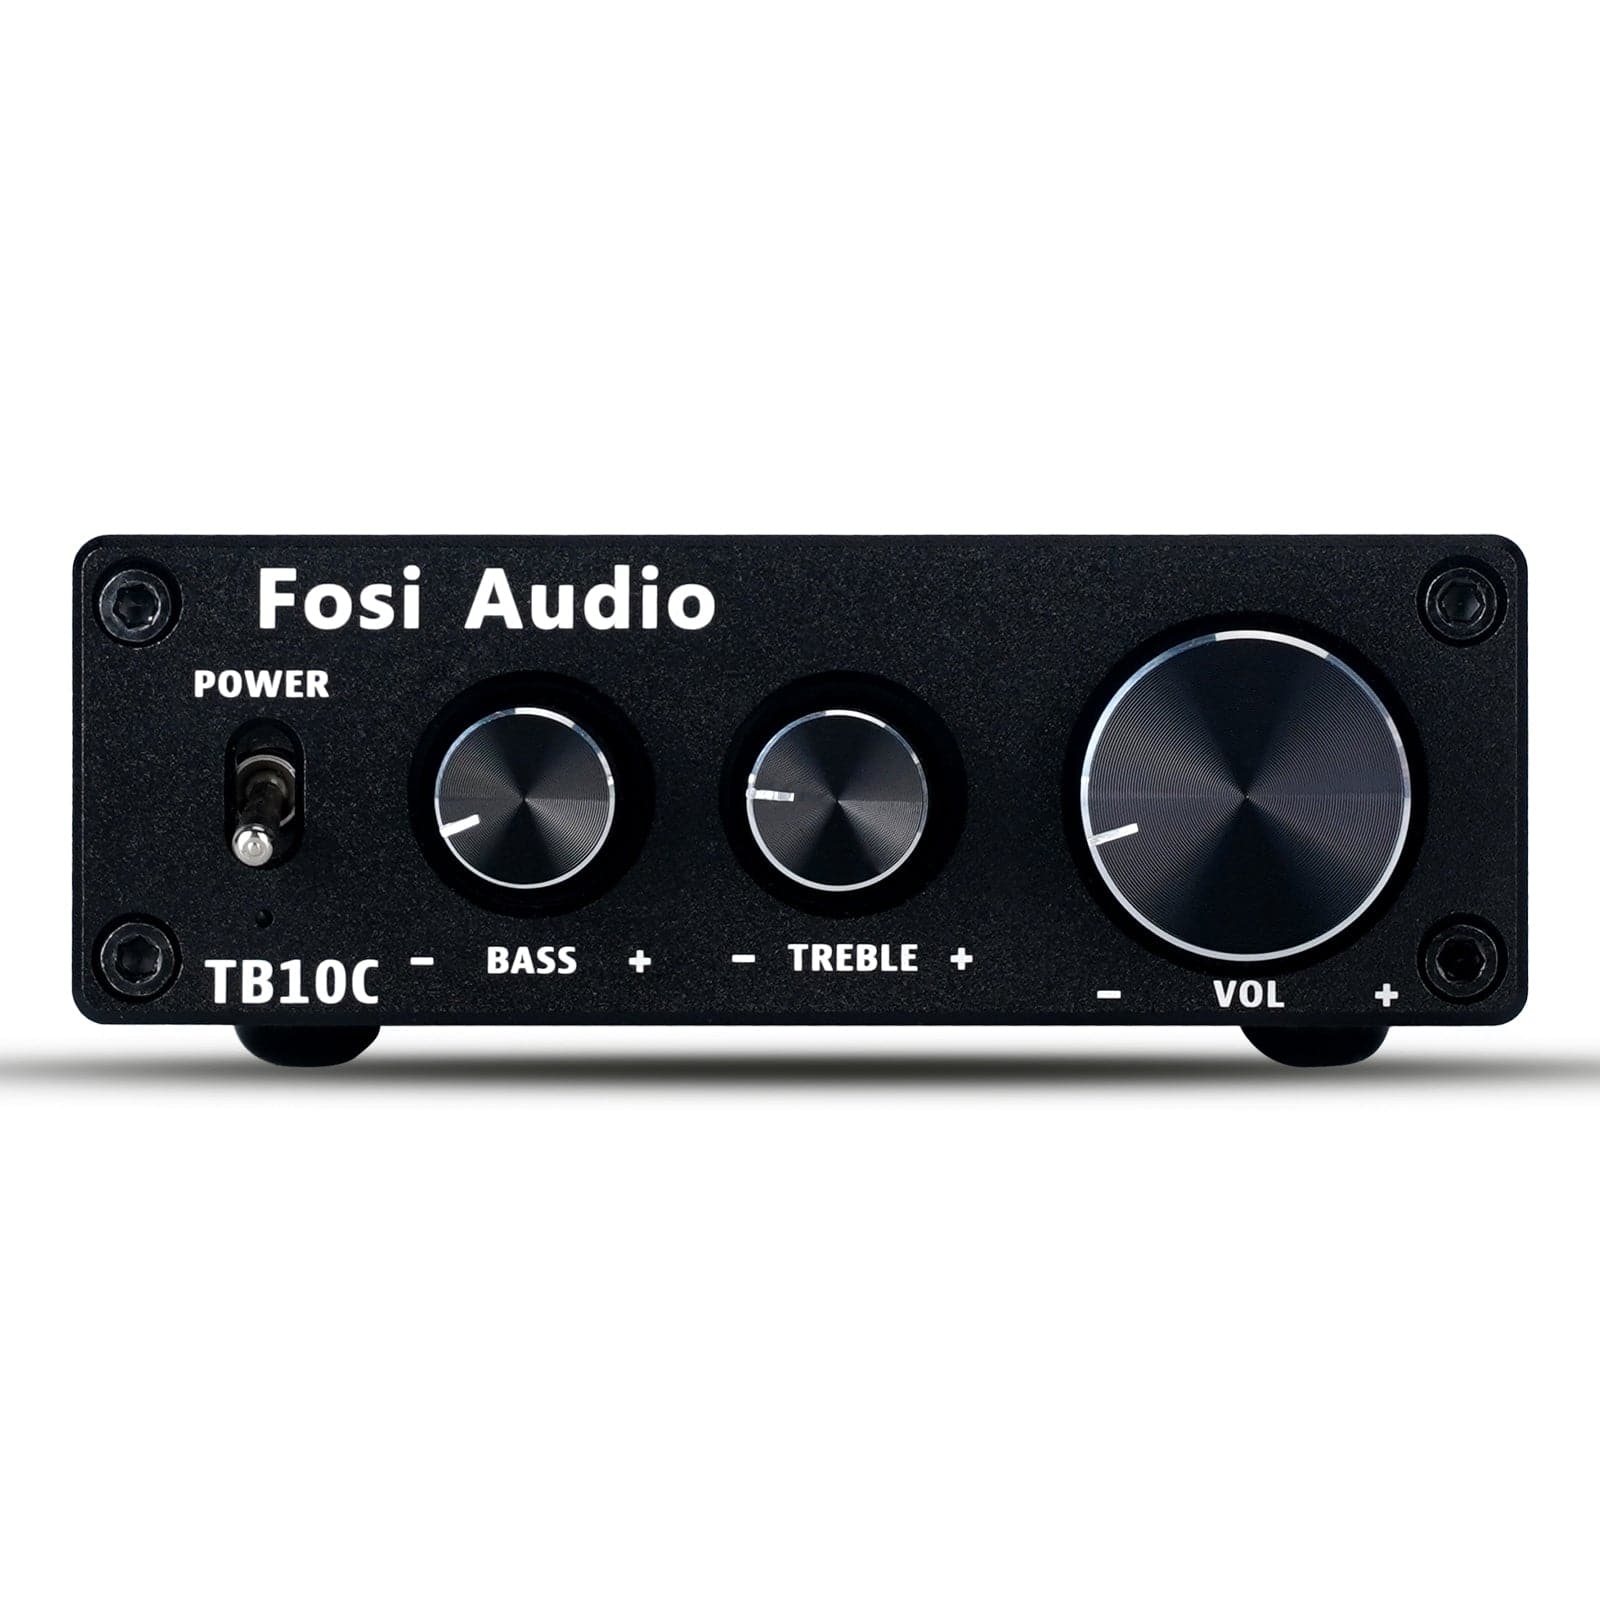 Fosi Audio TB10C 2 Channel TPA3116 Stereo Mini Audio Amplifier for Home Speakers 50W x 2 (Refurbished Unit)